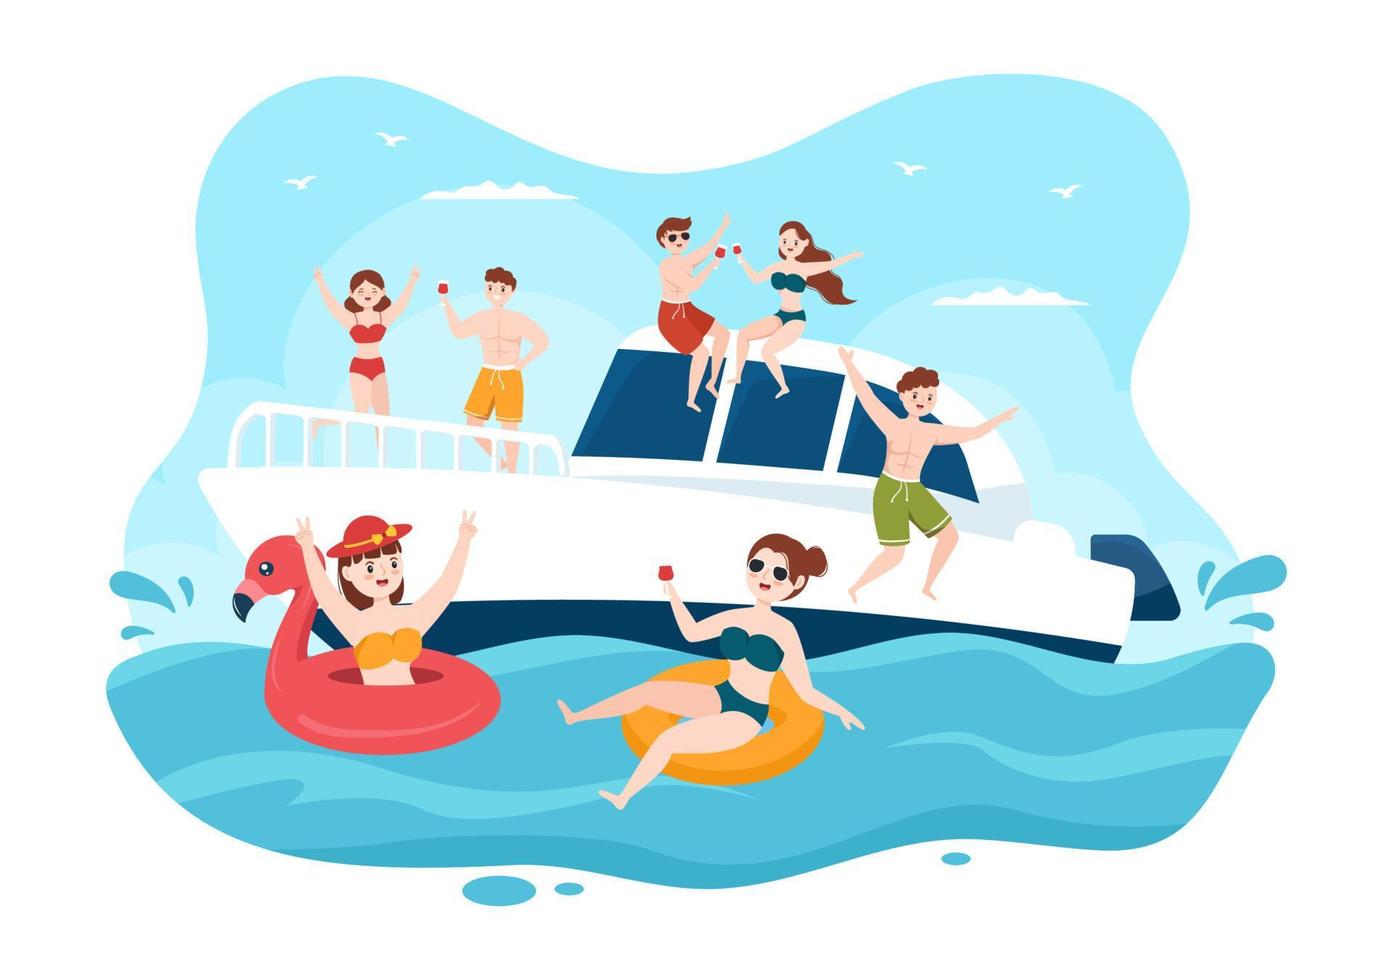 Yachts Template Hand Drawn Cartoon Flat Illustration with People Dancing, Sunbathing, Drinking Cocktails and Relaxing on Cruise Yacht at Ocean vector